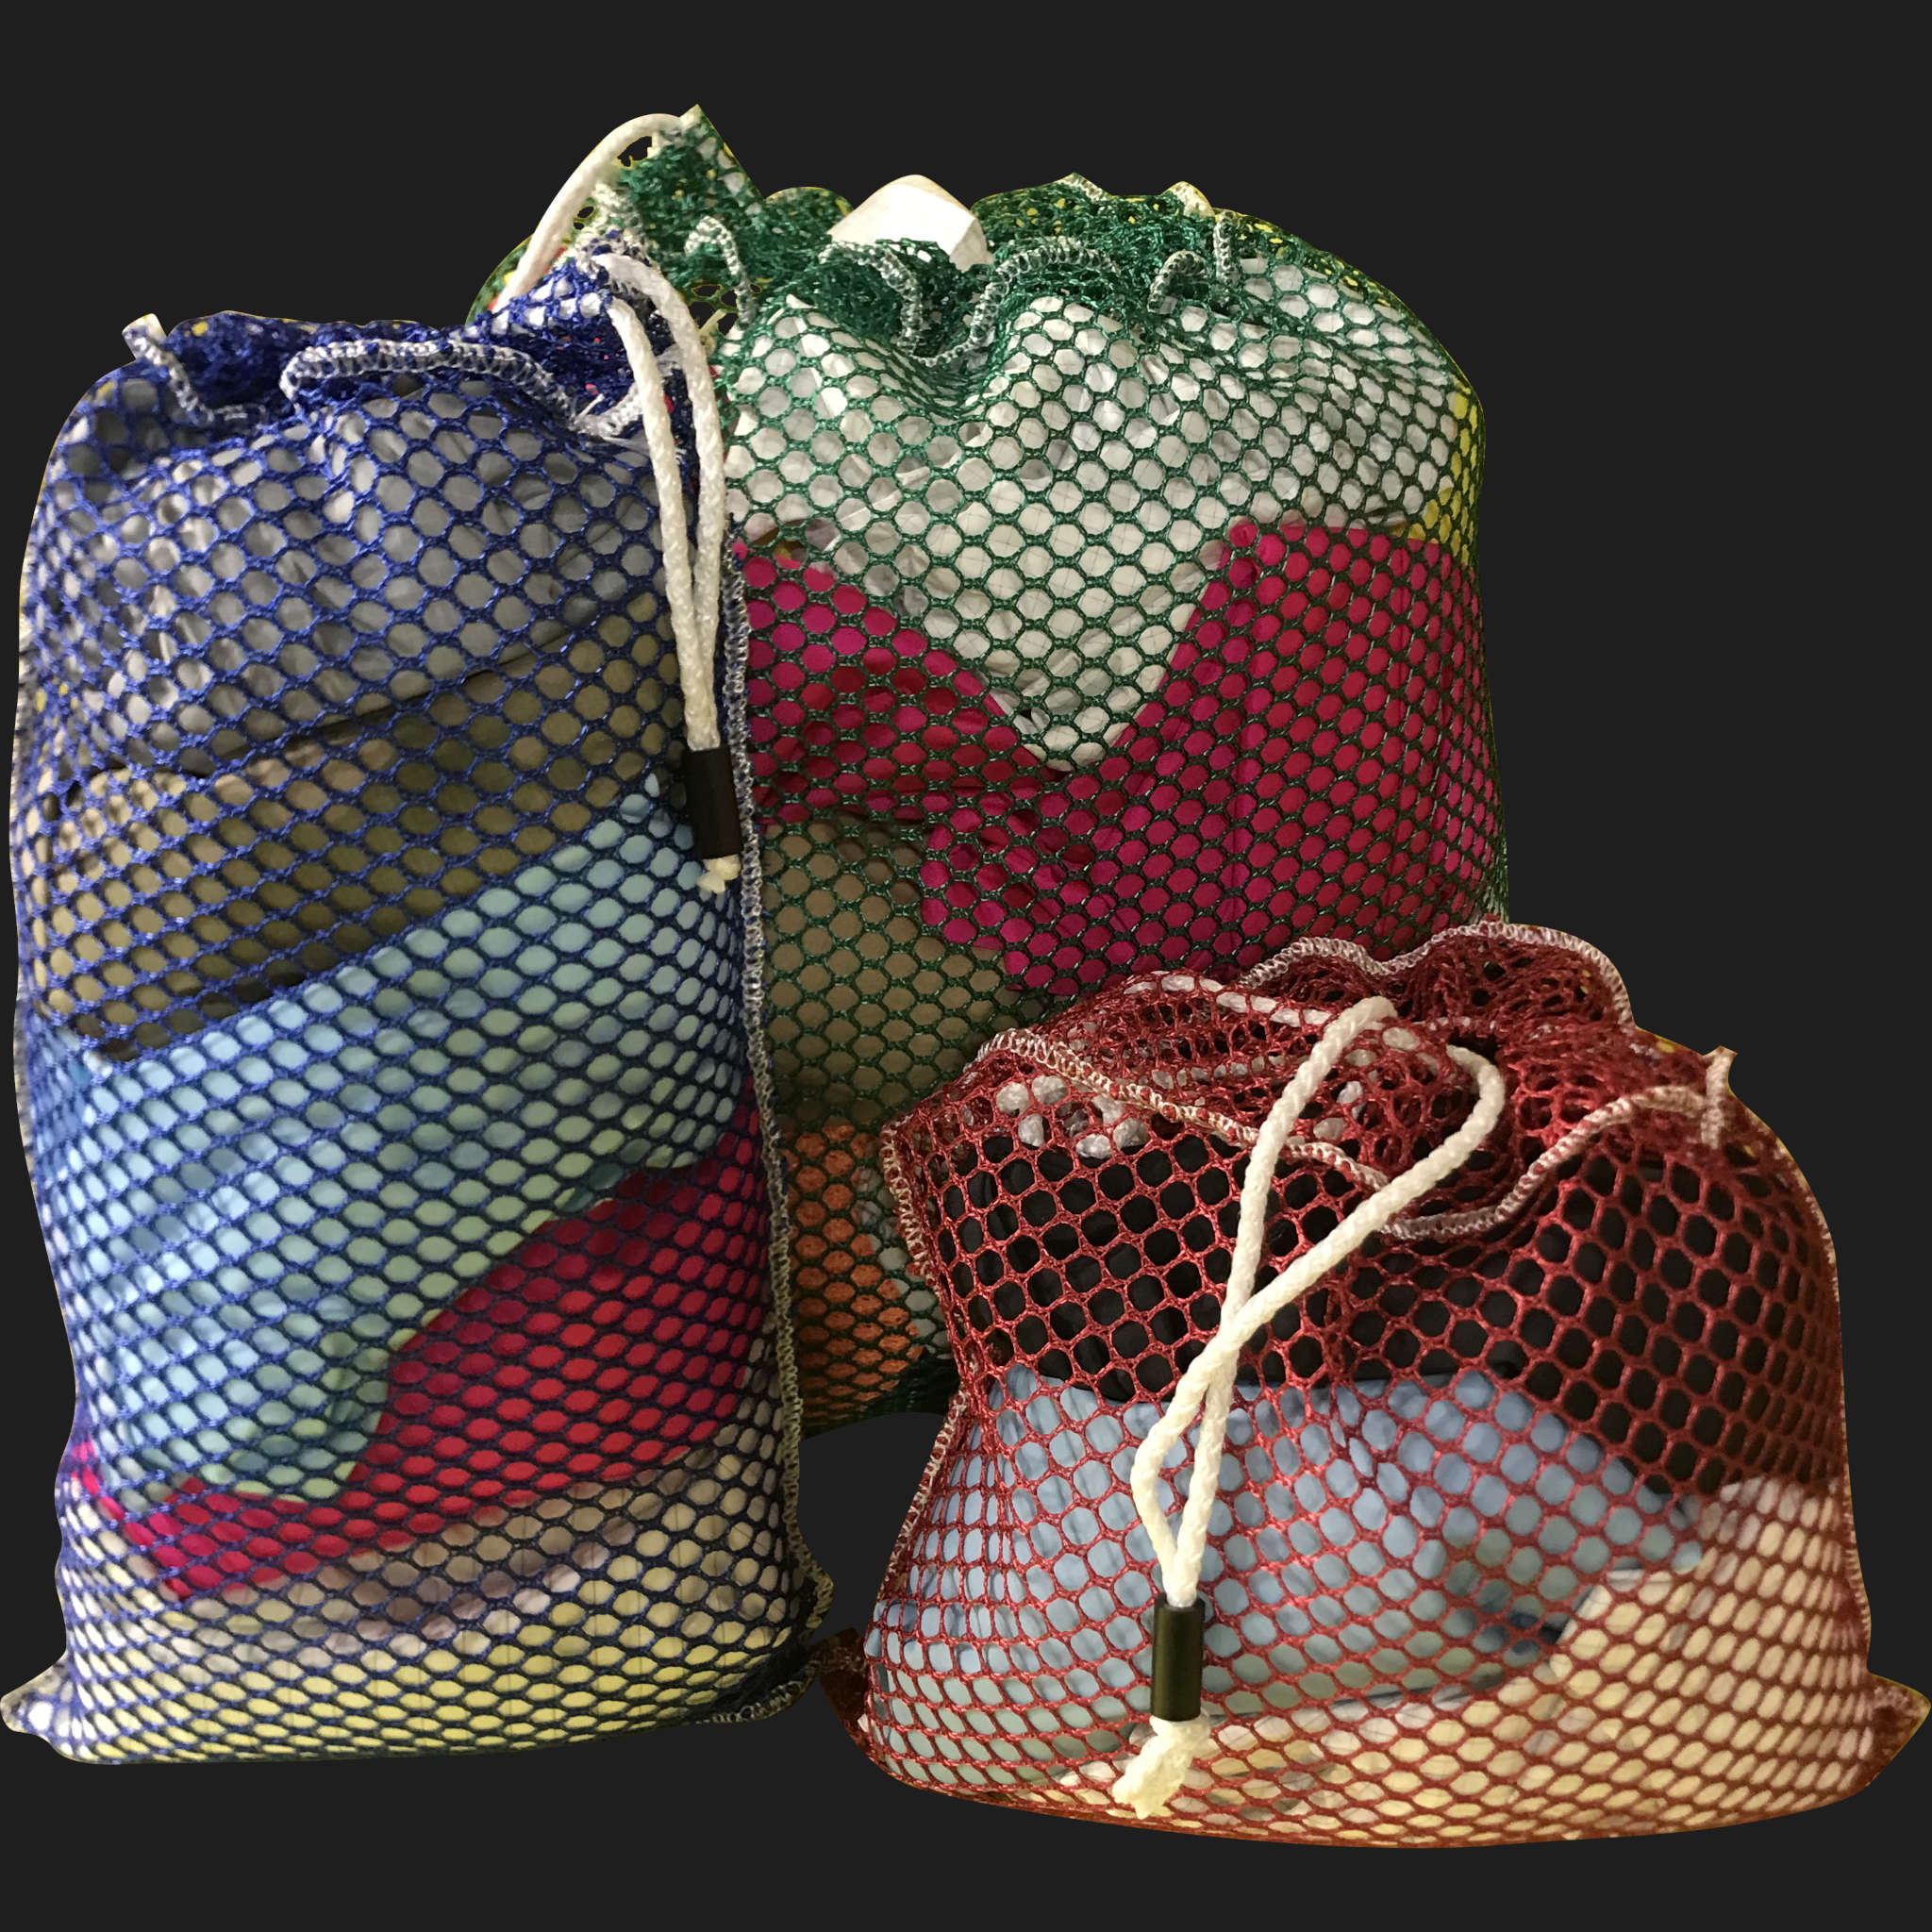 54" x 76" Customized Mesh-Net-Laundry Bags Heavy Duty with Cord and barrellock closure